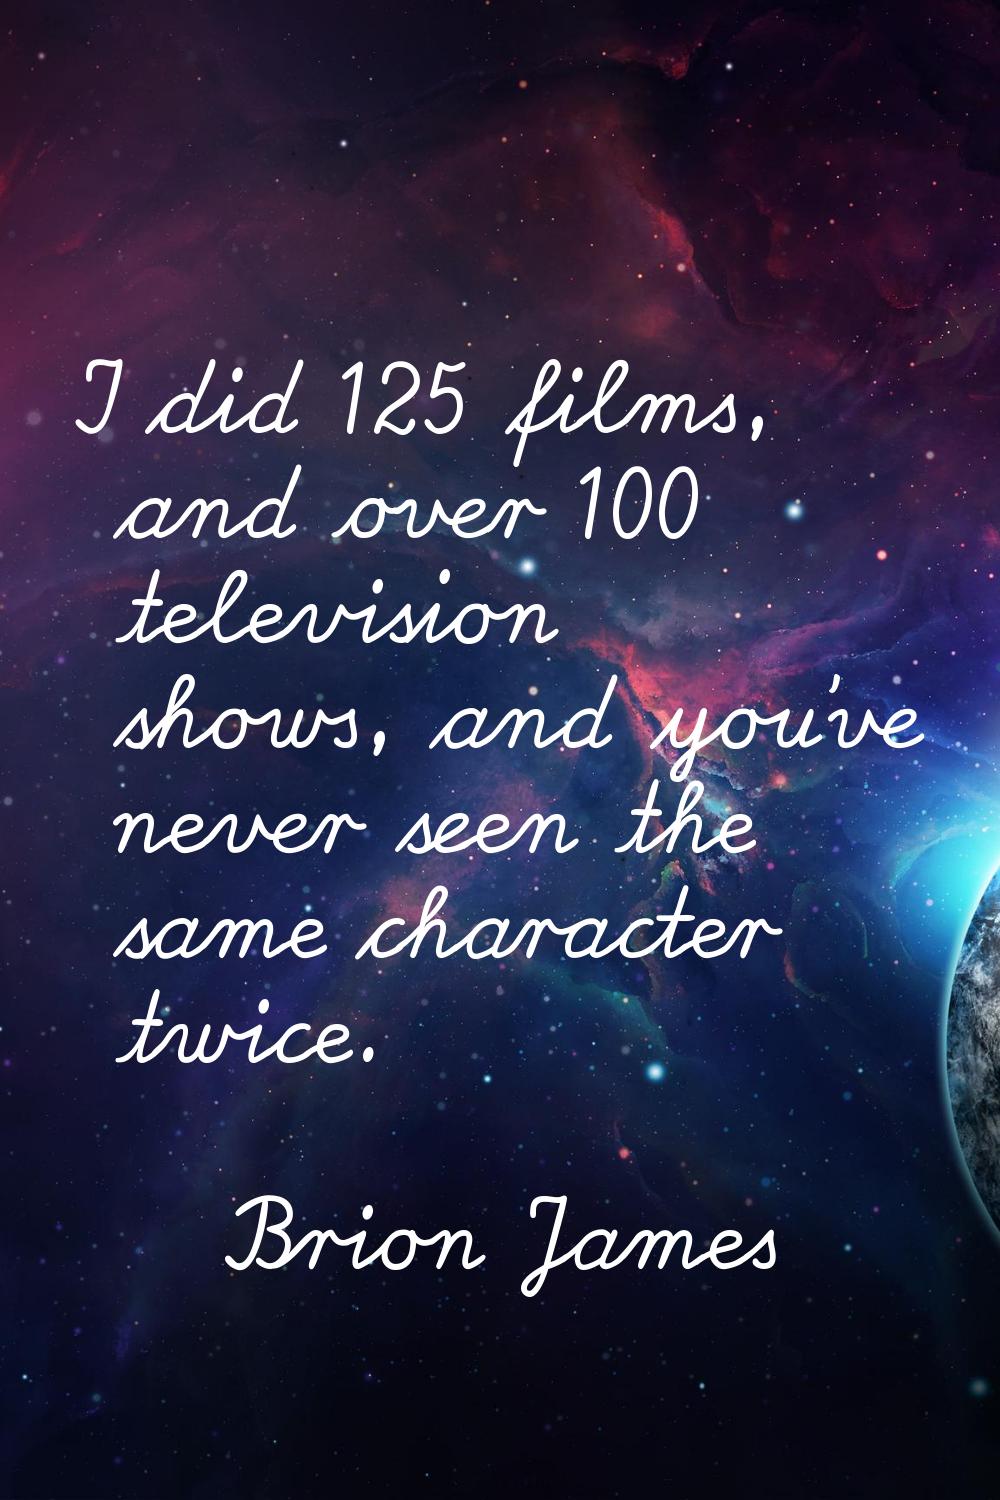 I did 125 films, and over 100 television shows, and you've never seen the same character twice.